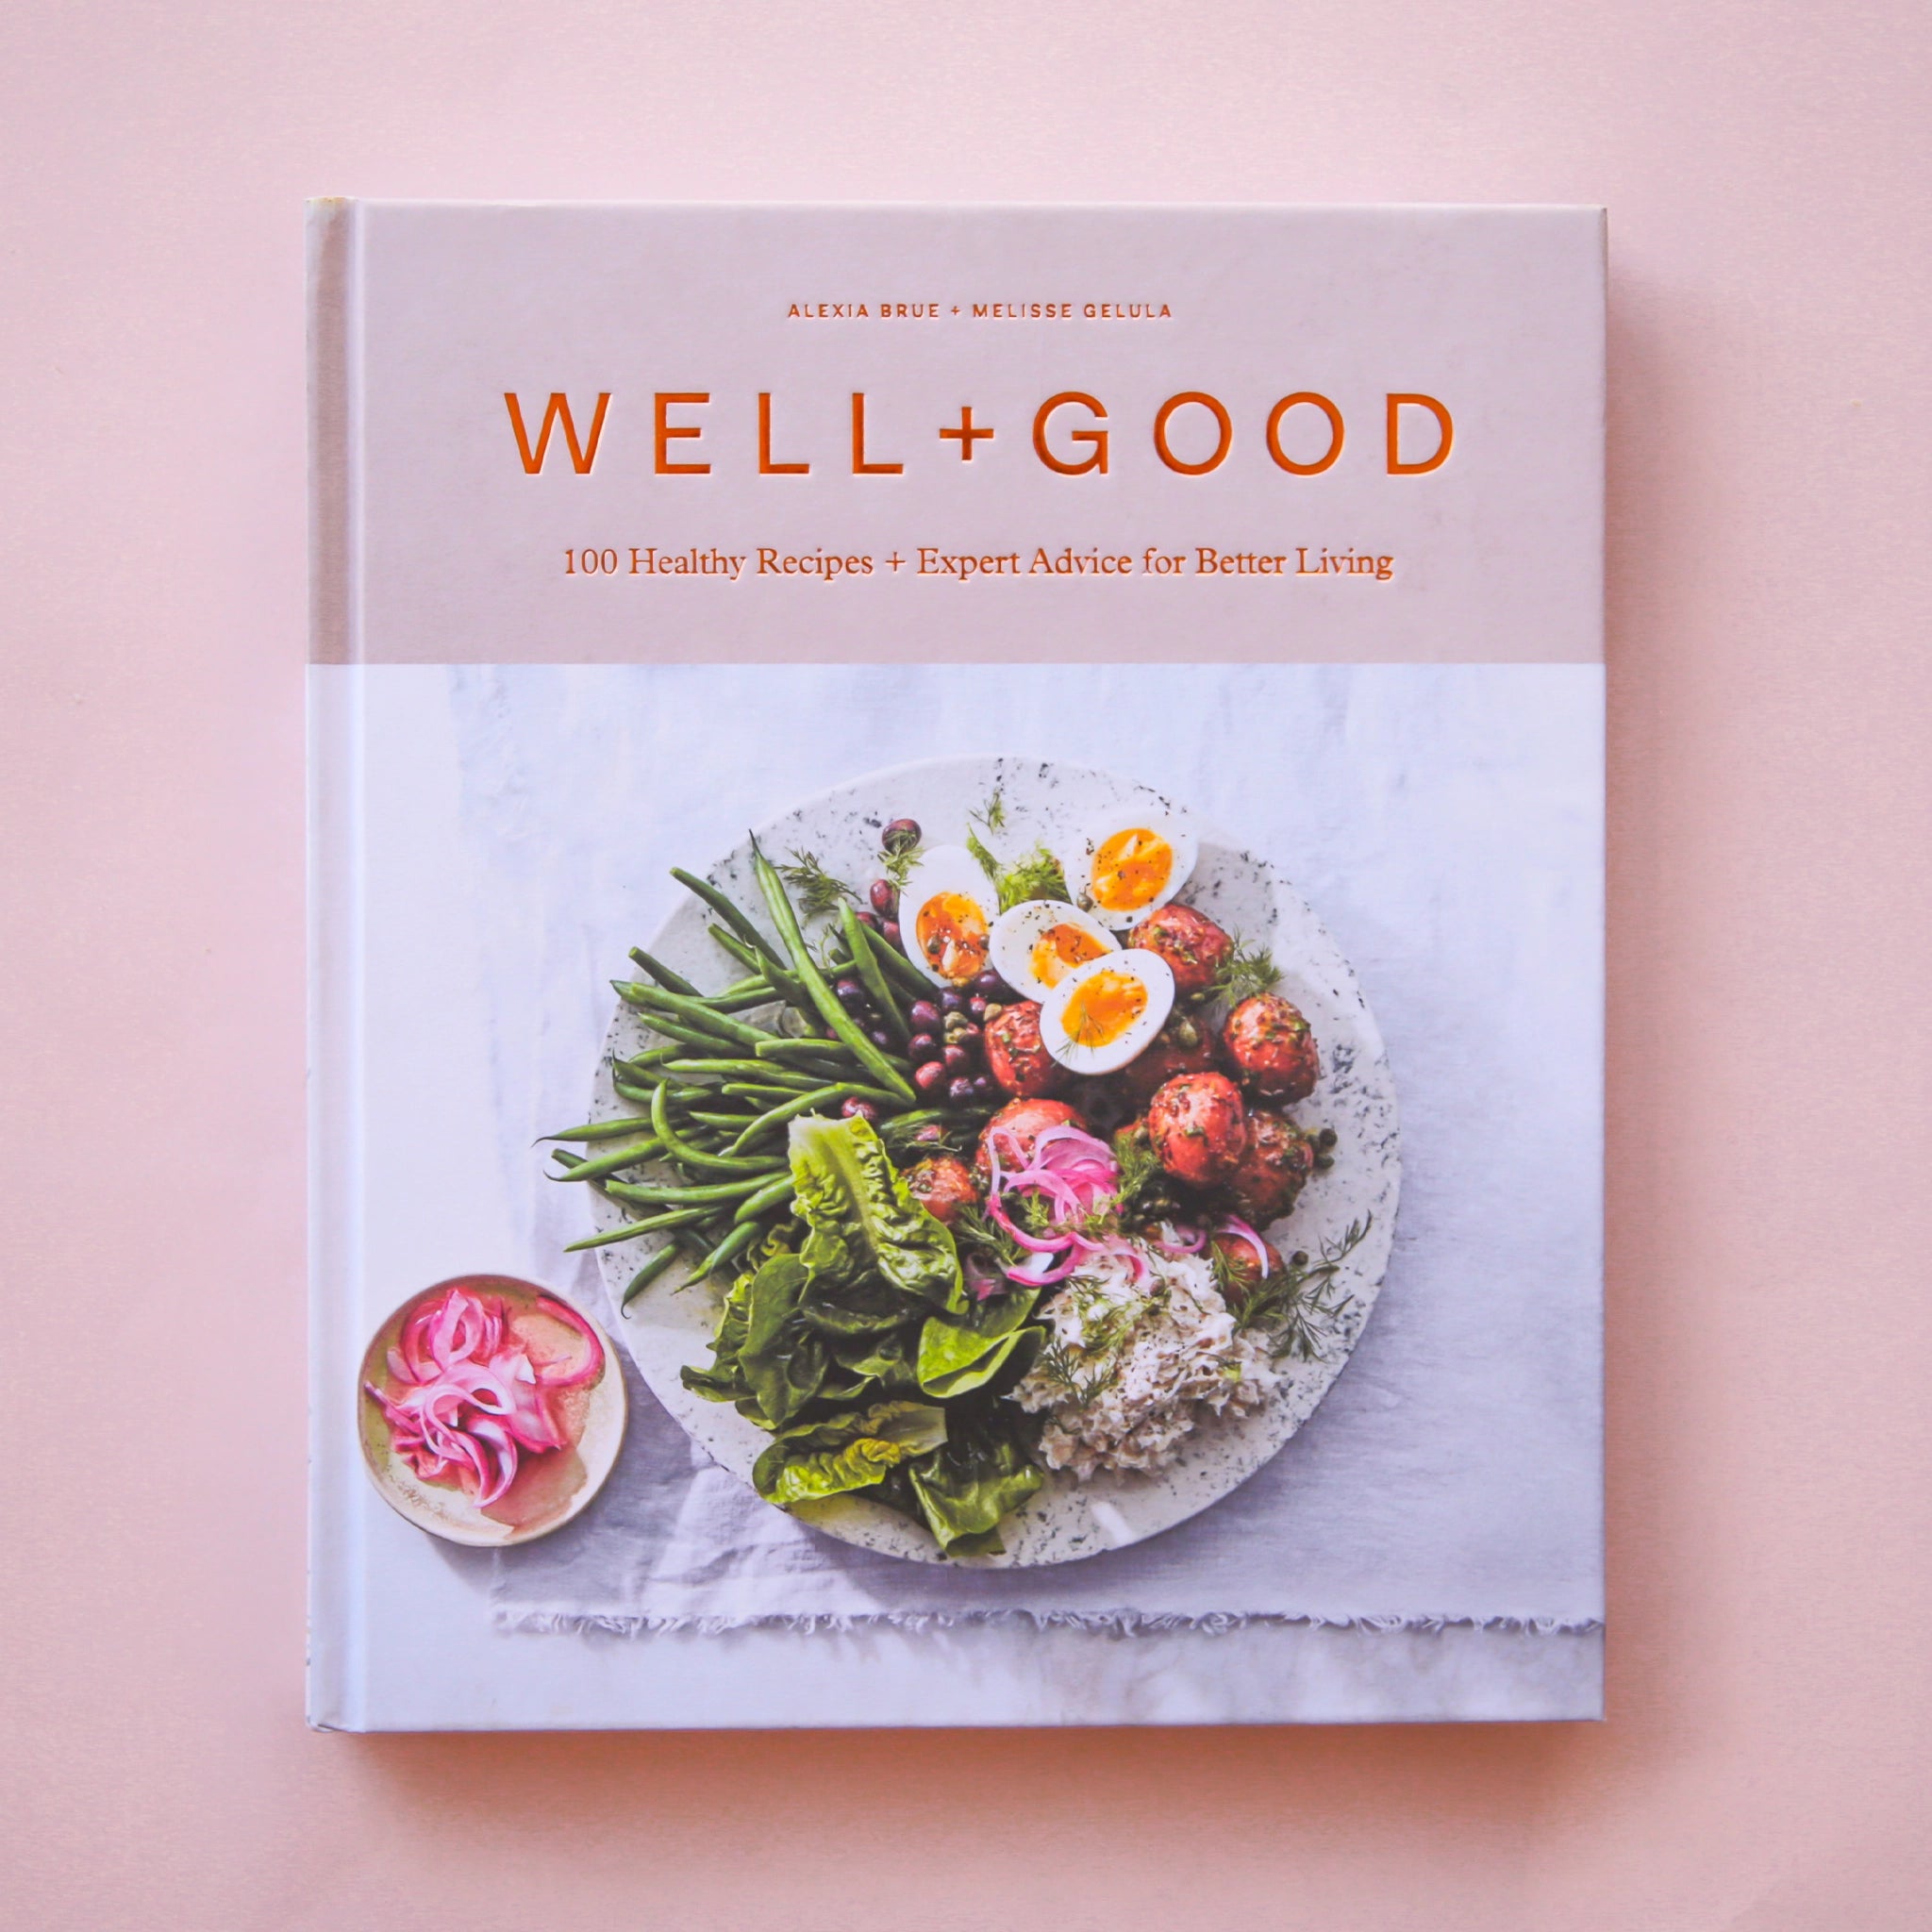 Hard cover cookbook titled 'Well + Good, 100 healthy recipes + expert advice for better living' in gold lettering. Below the title is a beautifully plated salad of greens, eggs, rice and more.